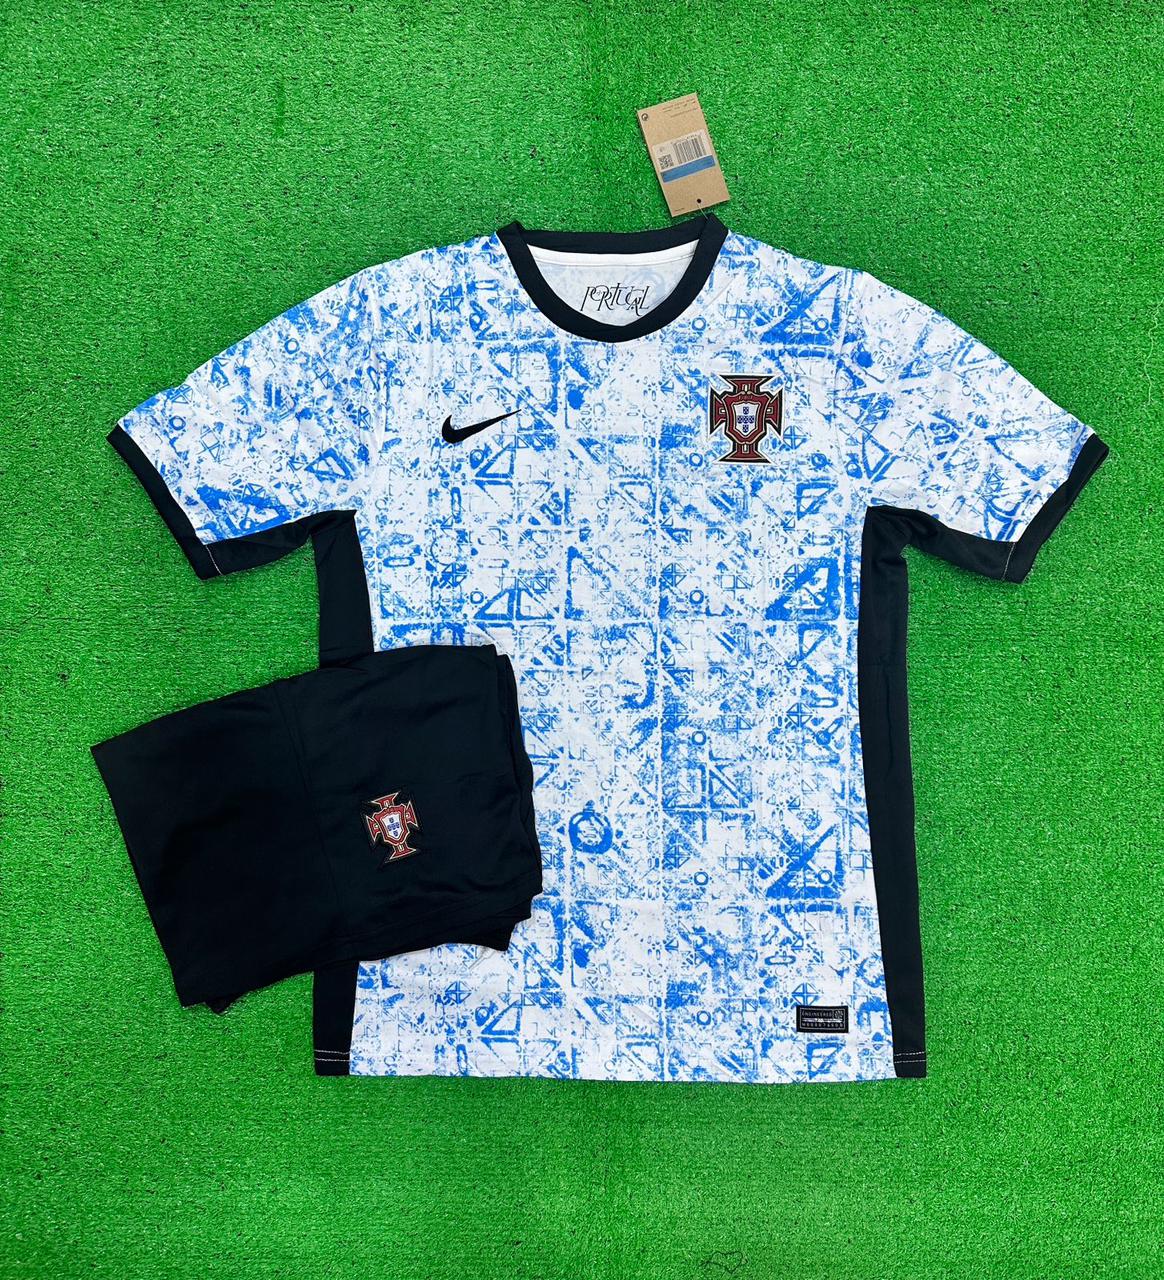 PORTUGAL AWAY JERSEY WITH SHORTS